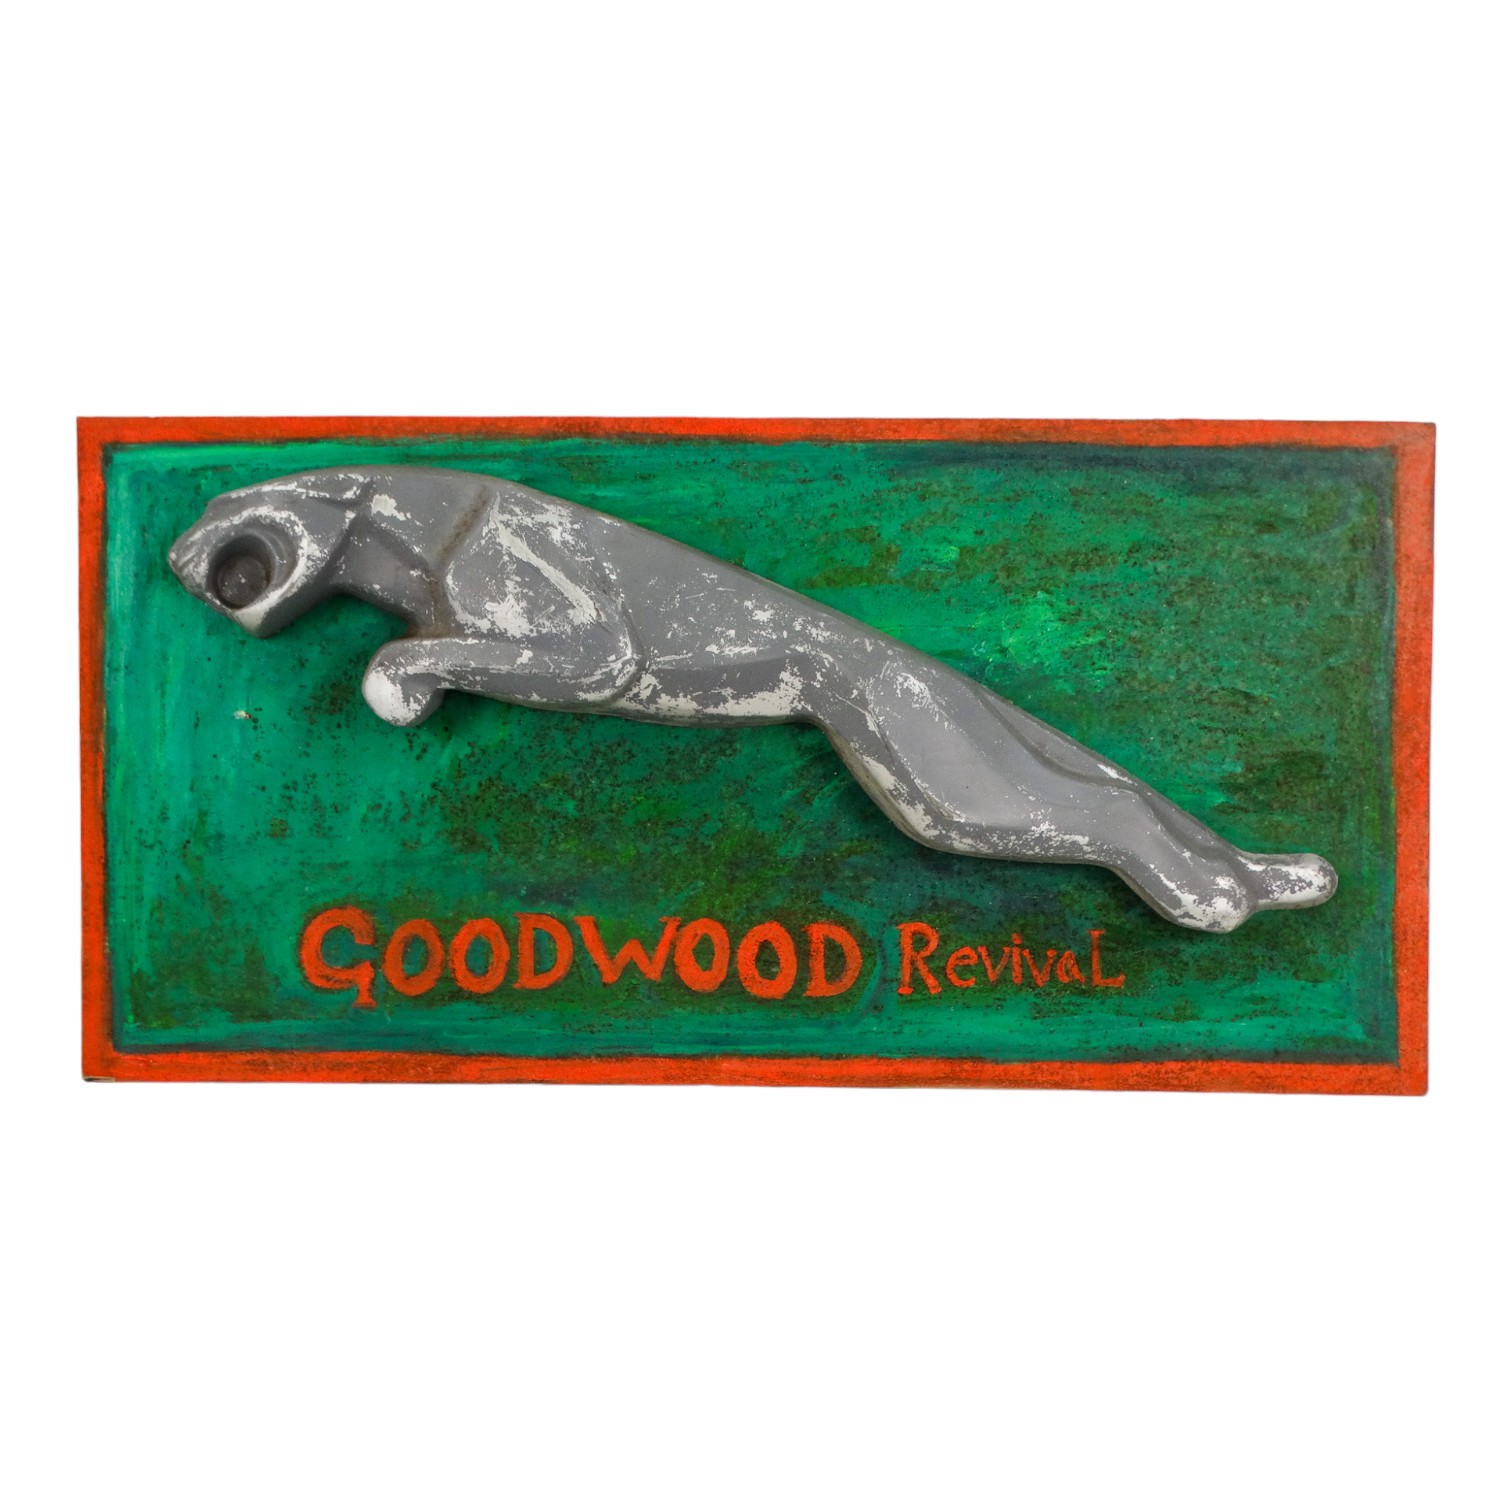 A 20th century Jaguar cars logo - the glass fibre leaping cat mounted on a later board inscribed